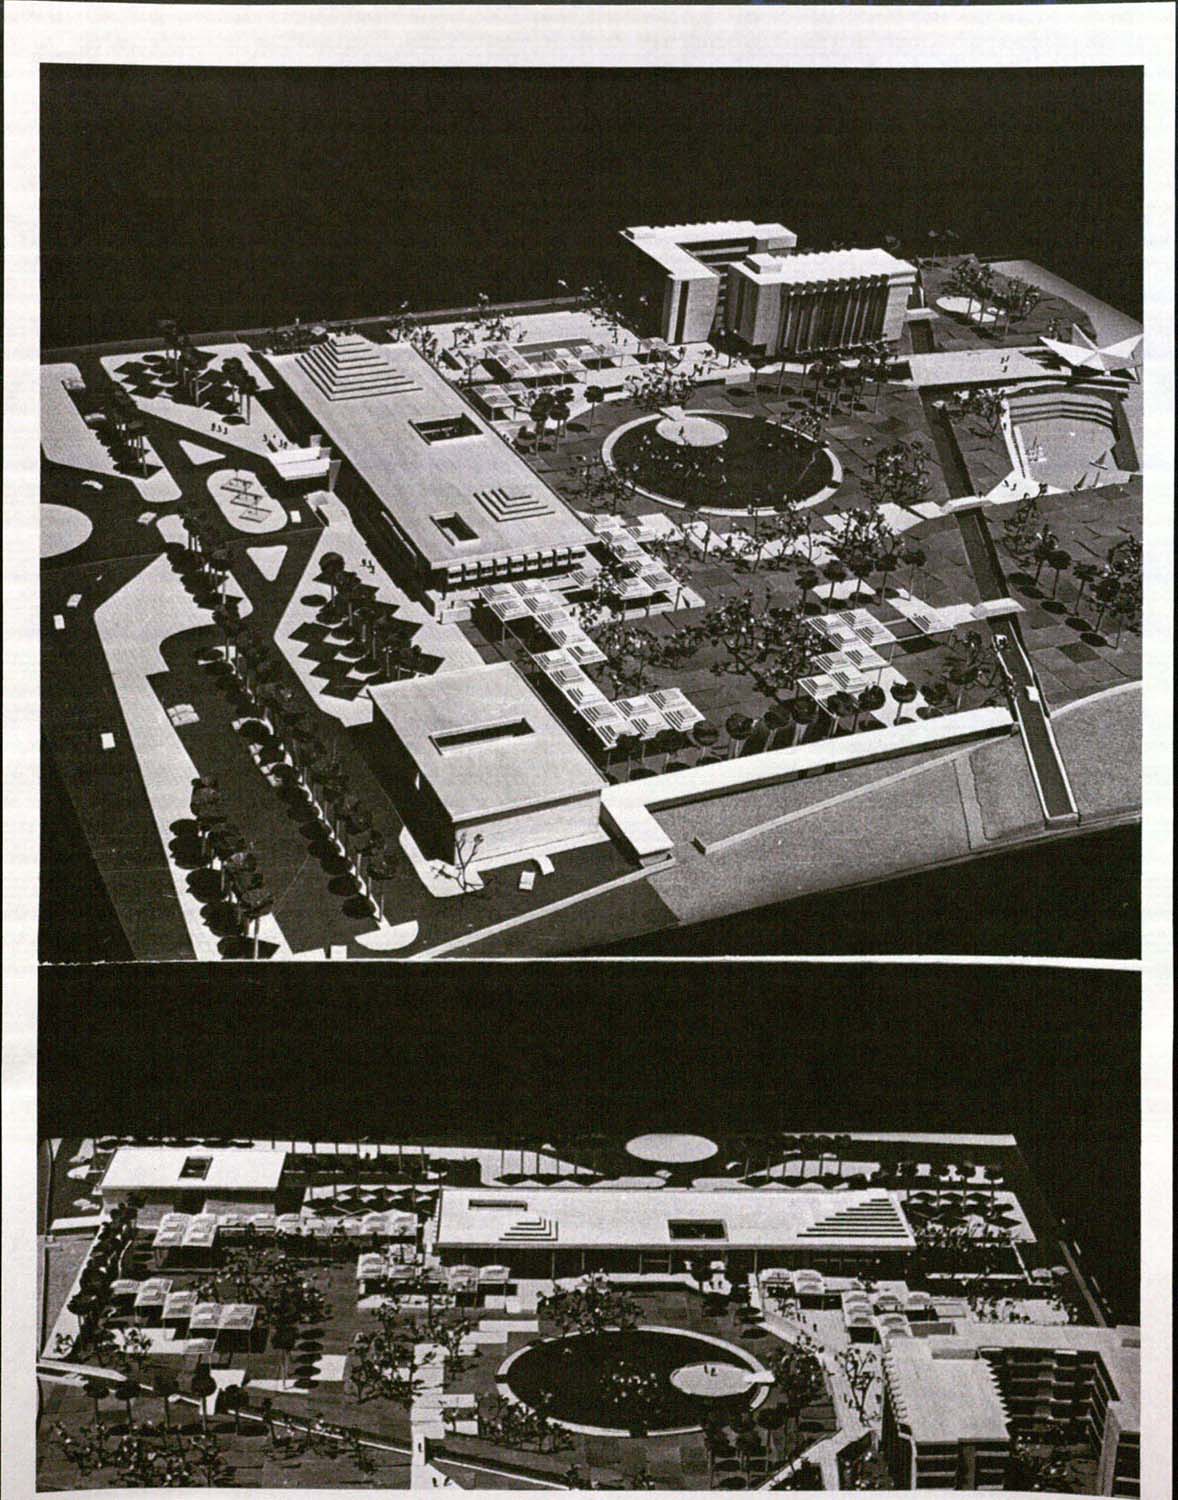 Two combined images showing alternate views of the model used to design the Military Officers Club.